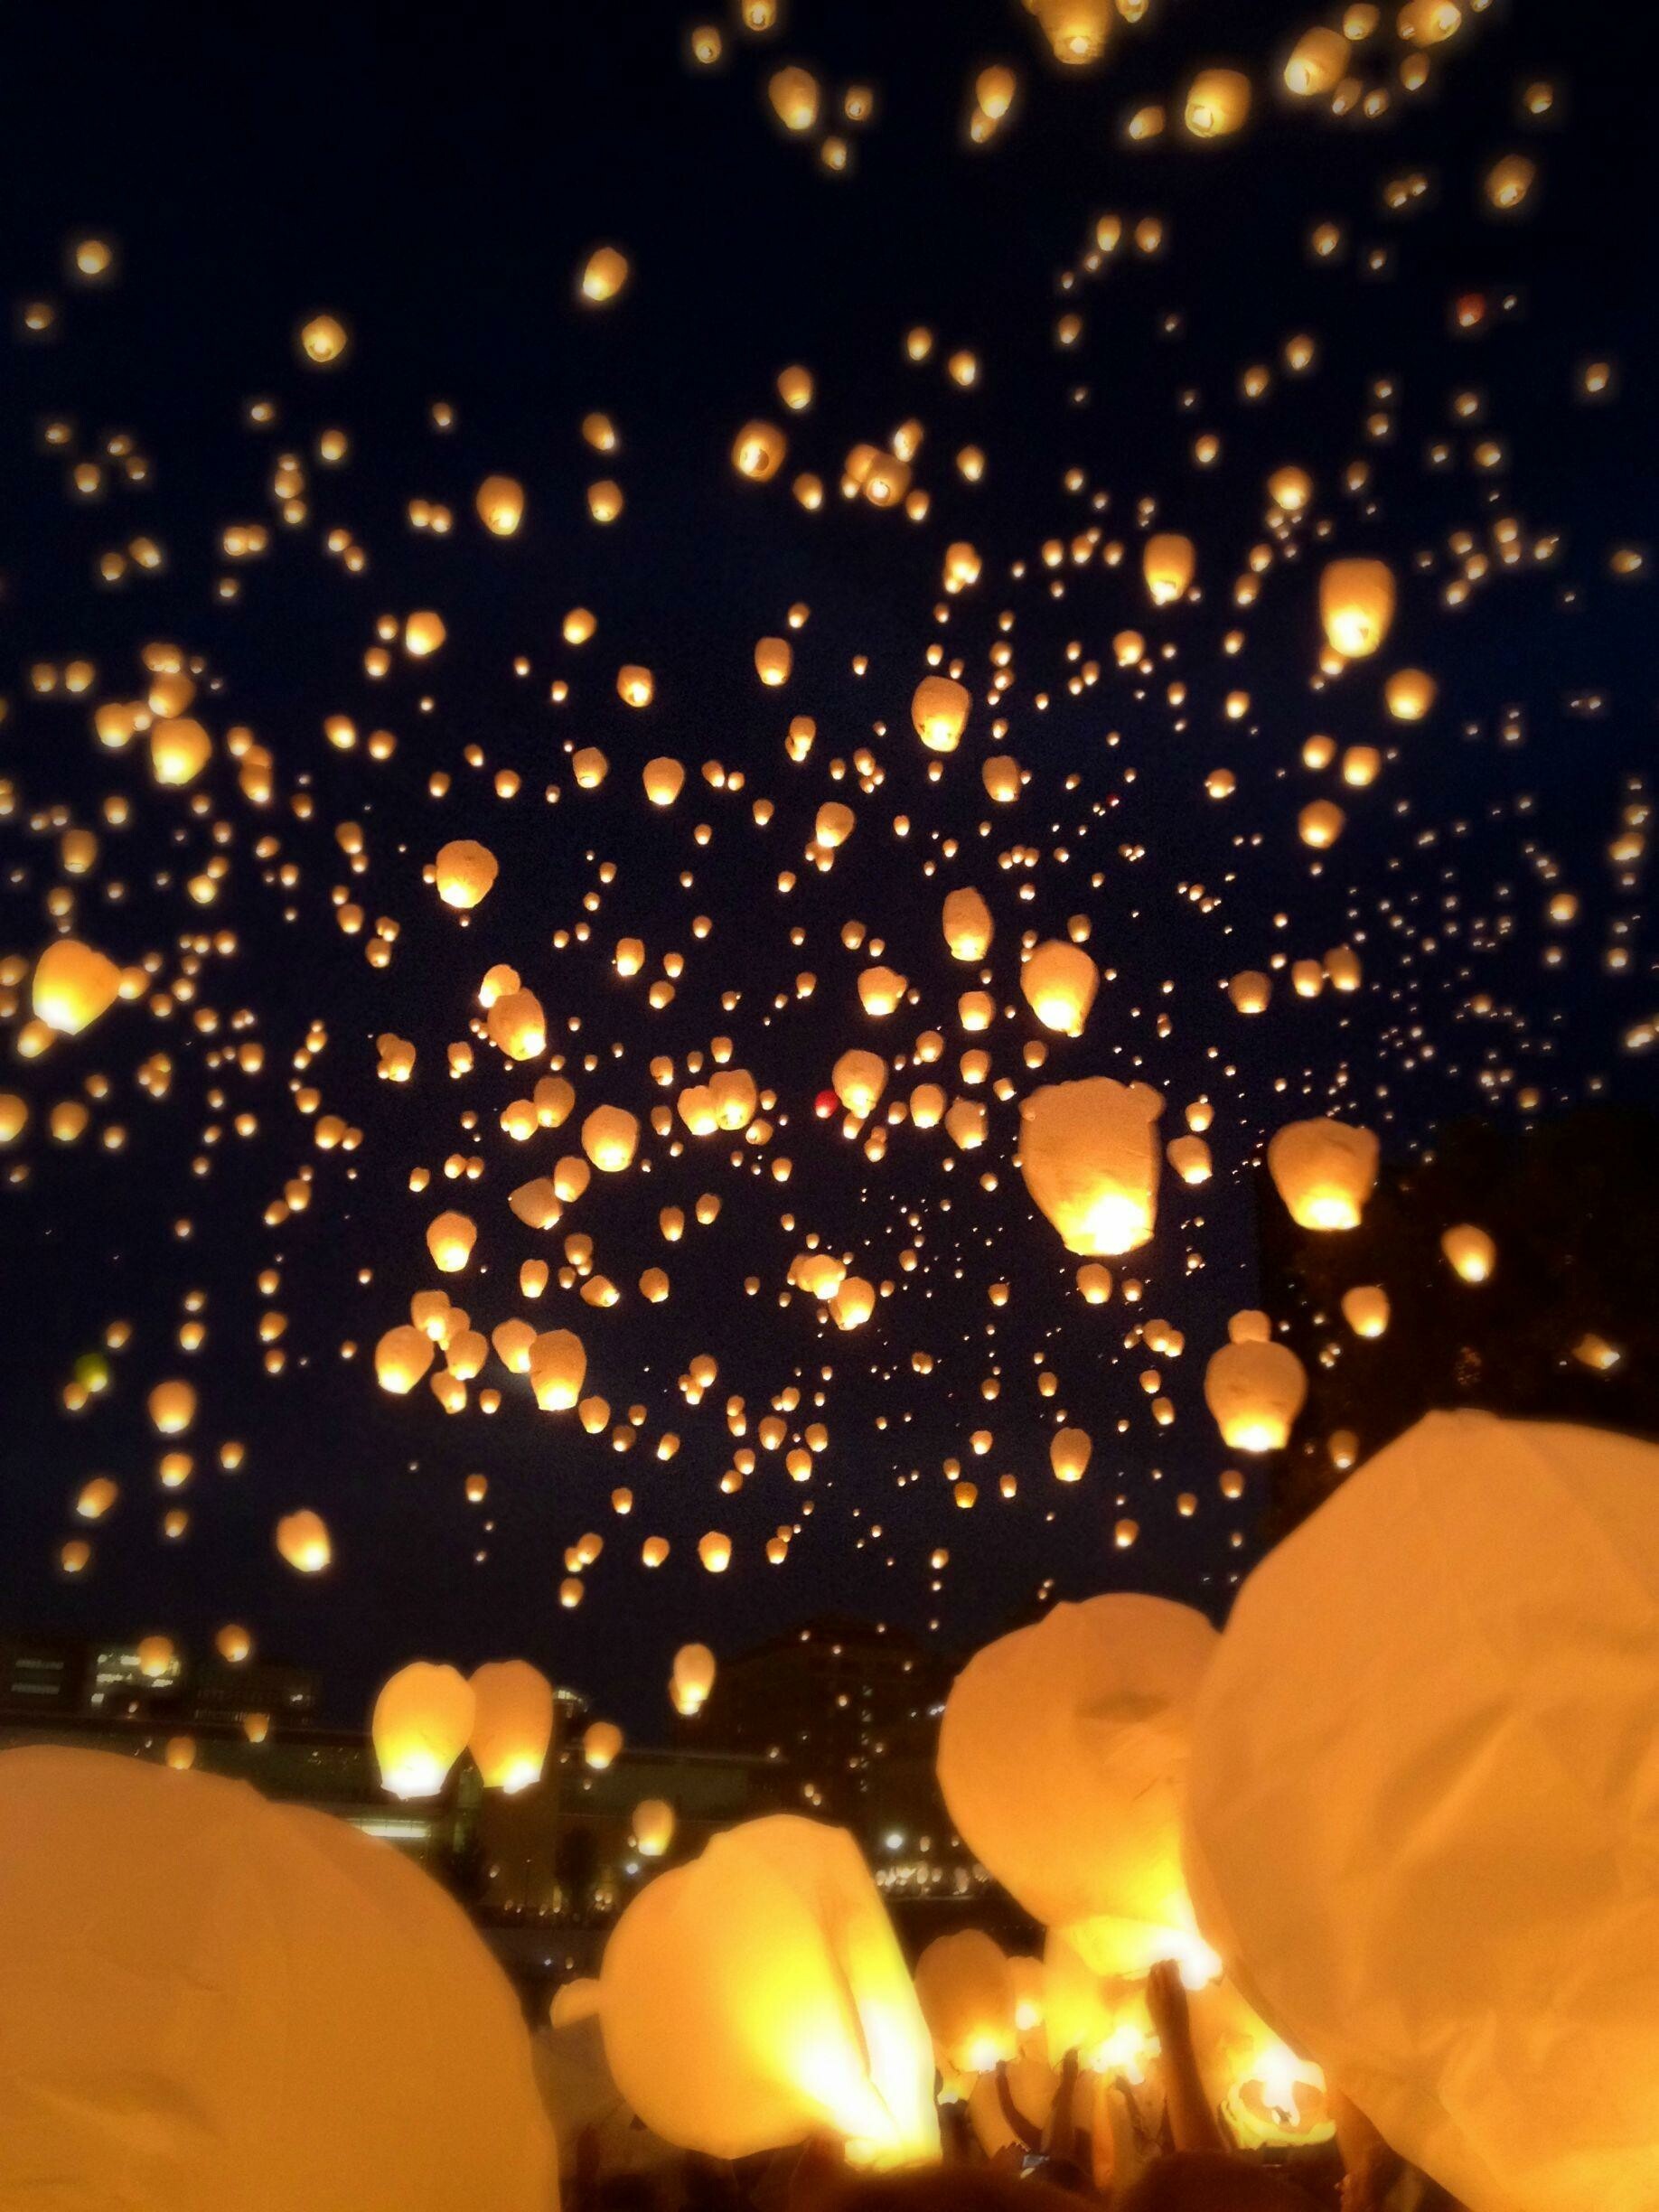 Festival: Lanterns, Holiday celebrated in China and other Asian countries that honors deceased ancestors. 1840x2450 HD Wallpaper.